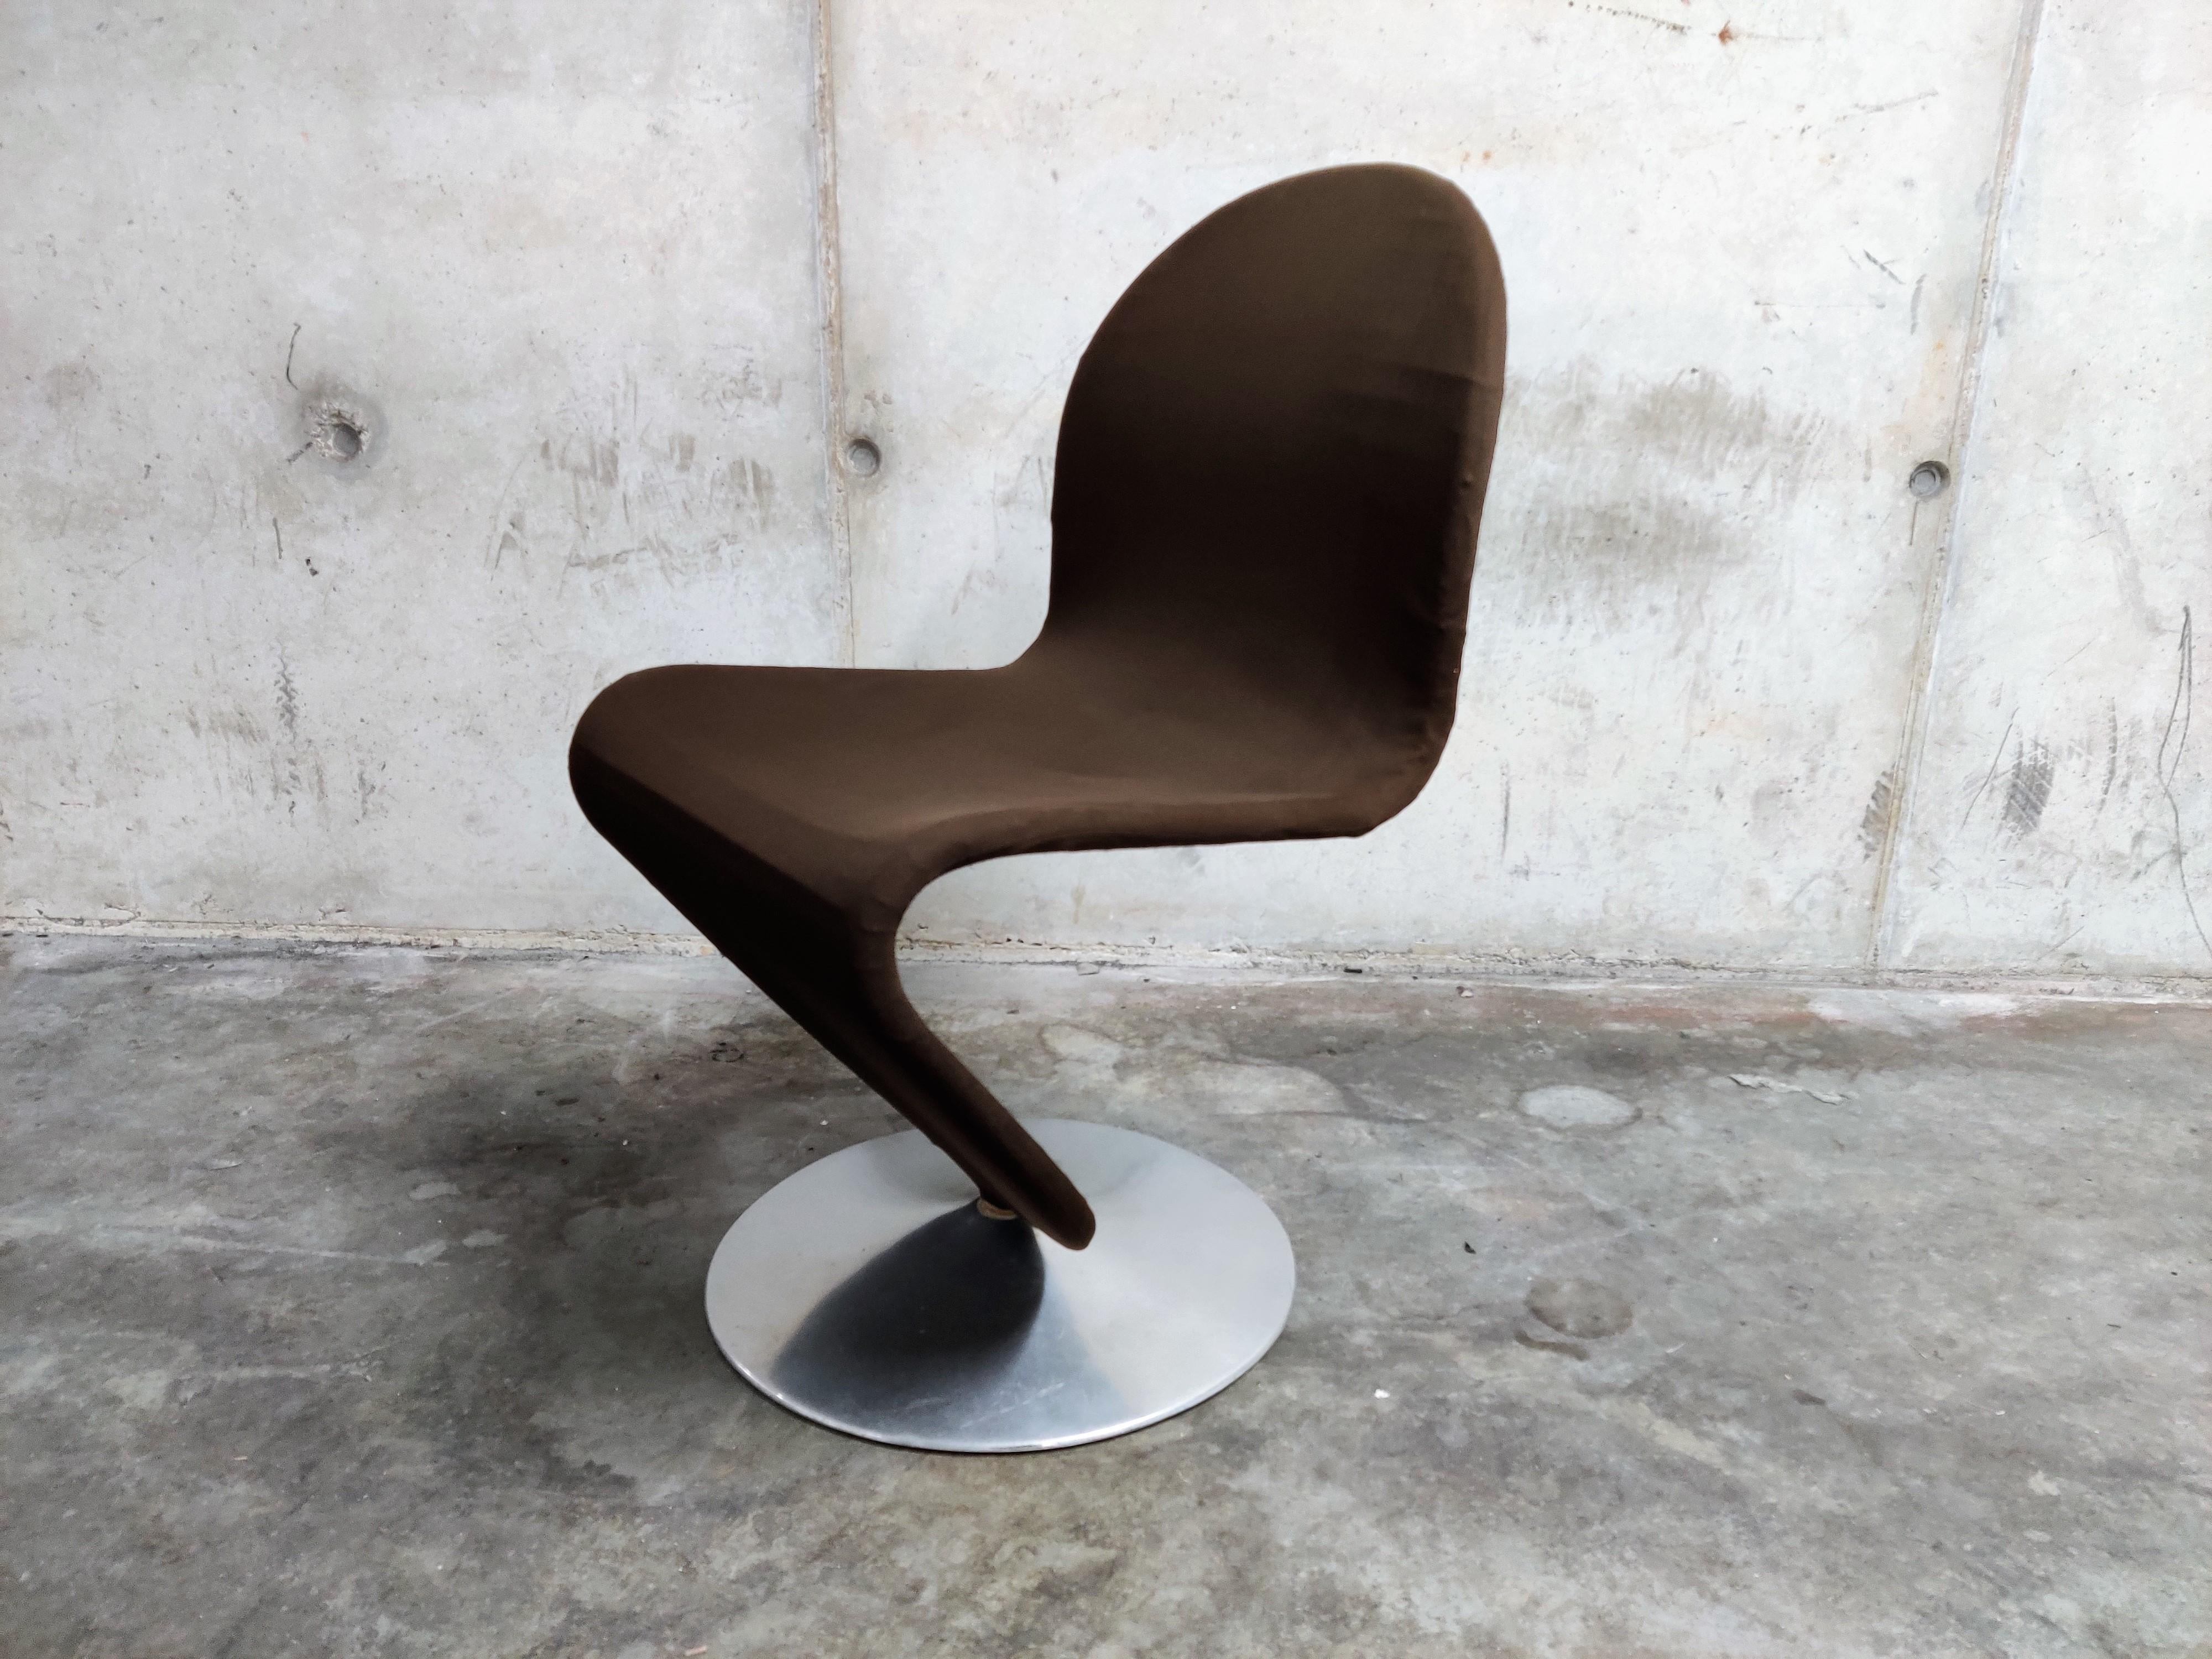 Model 'system 123' chair by Verner Panton for Fritz Hansen in brown fabric.

Good condition.

Comes with original label.

1970s - Denmark

Dimensions:

Height 90cm/35.43